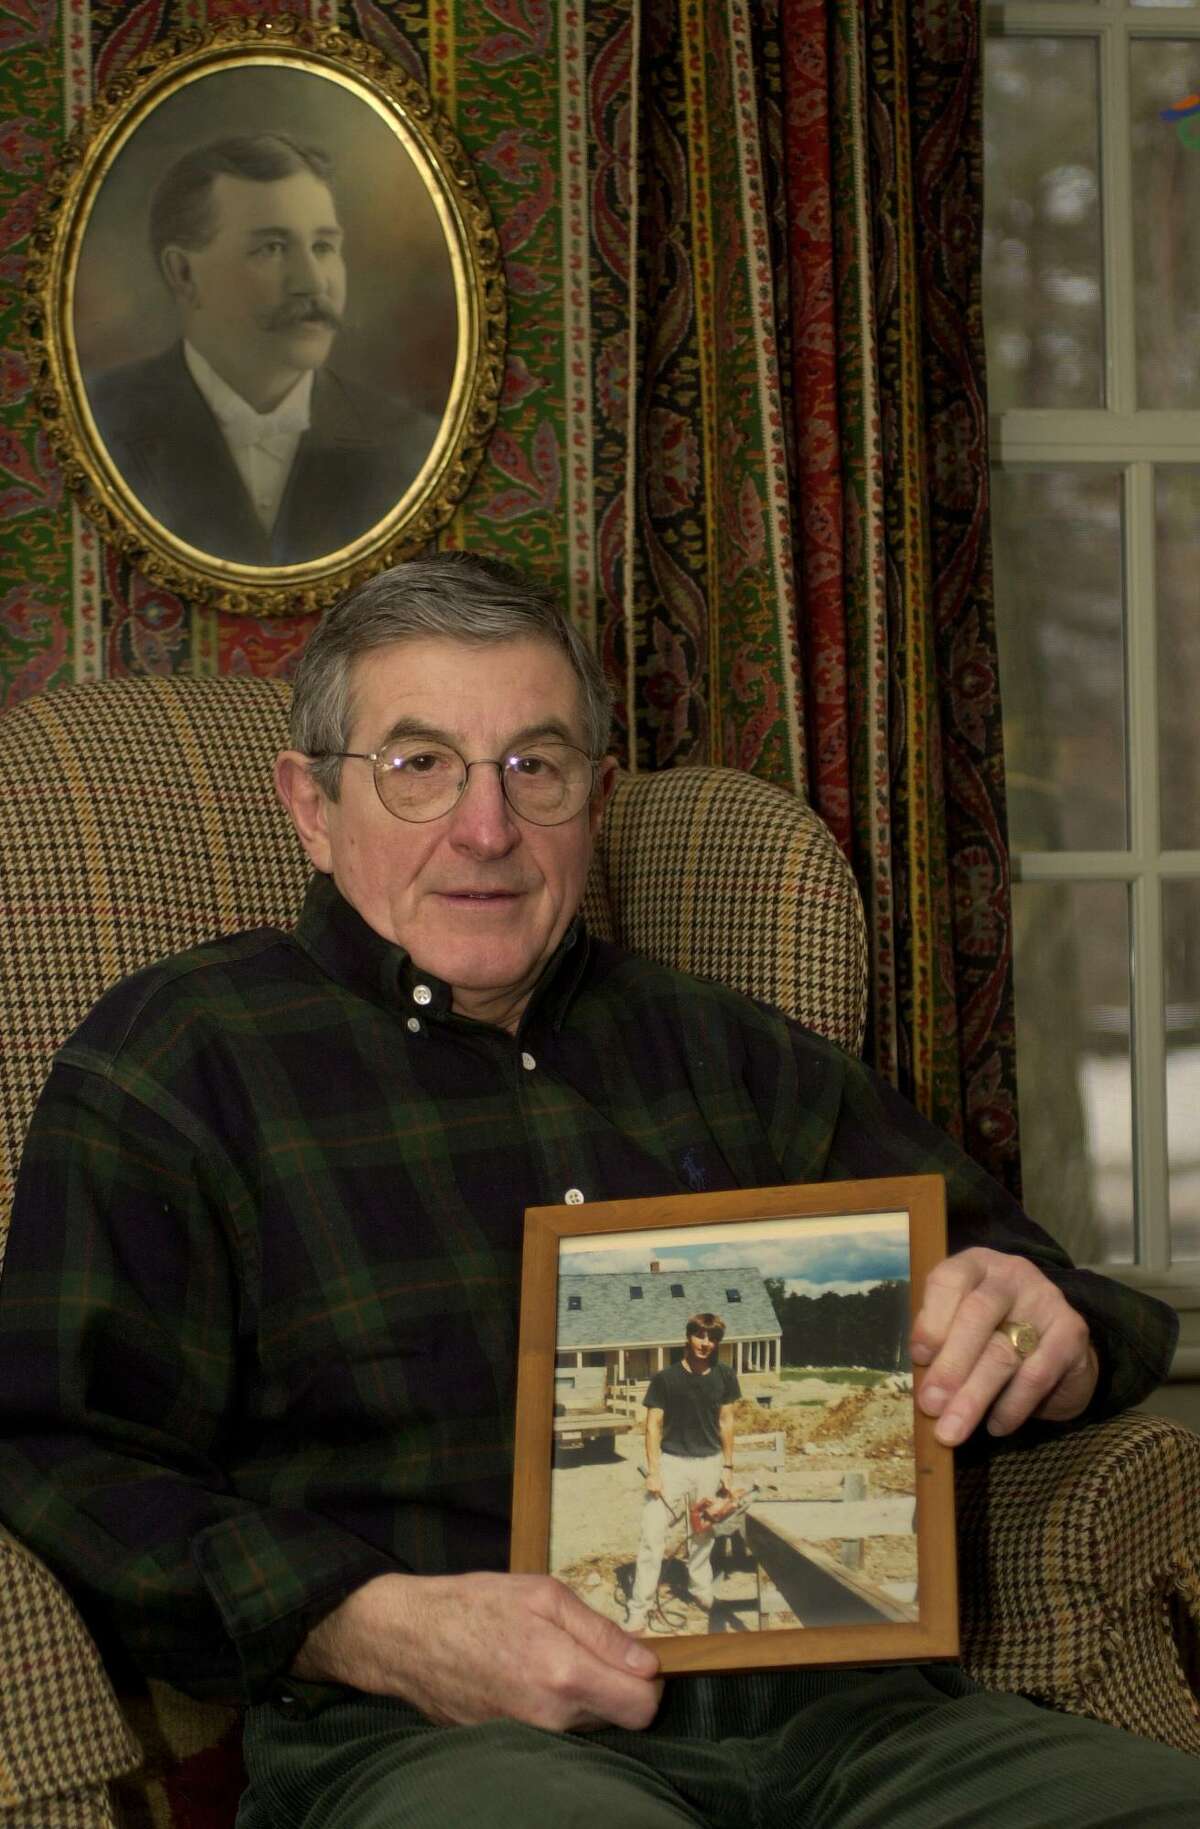 Jack Schultz holds a 1988 photograph of his son Thomas at his home in Ridgefield, Conn., Wednesday, Jan. 31, 2001. Thomas Schultz, a Syracuse University student, was killed in the Pan Am Flight 103 bombing over Lockerbie, Scotland on Dec. 21, 1988.